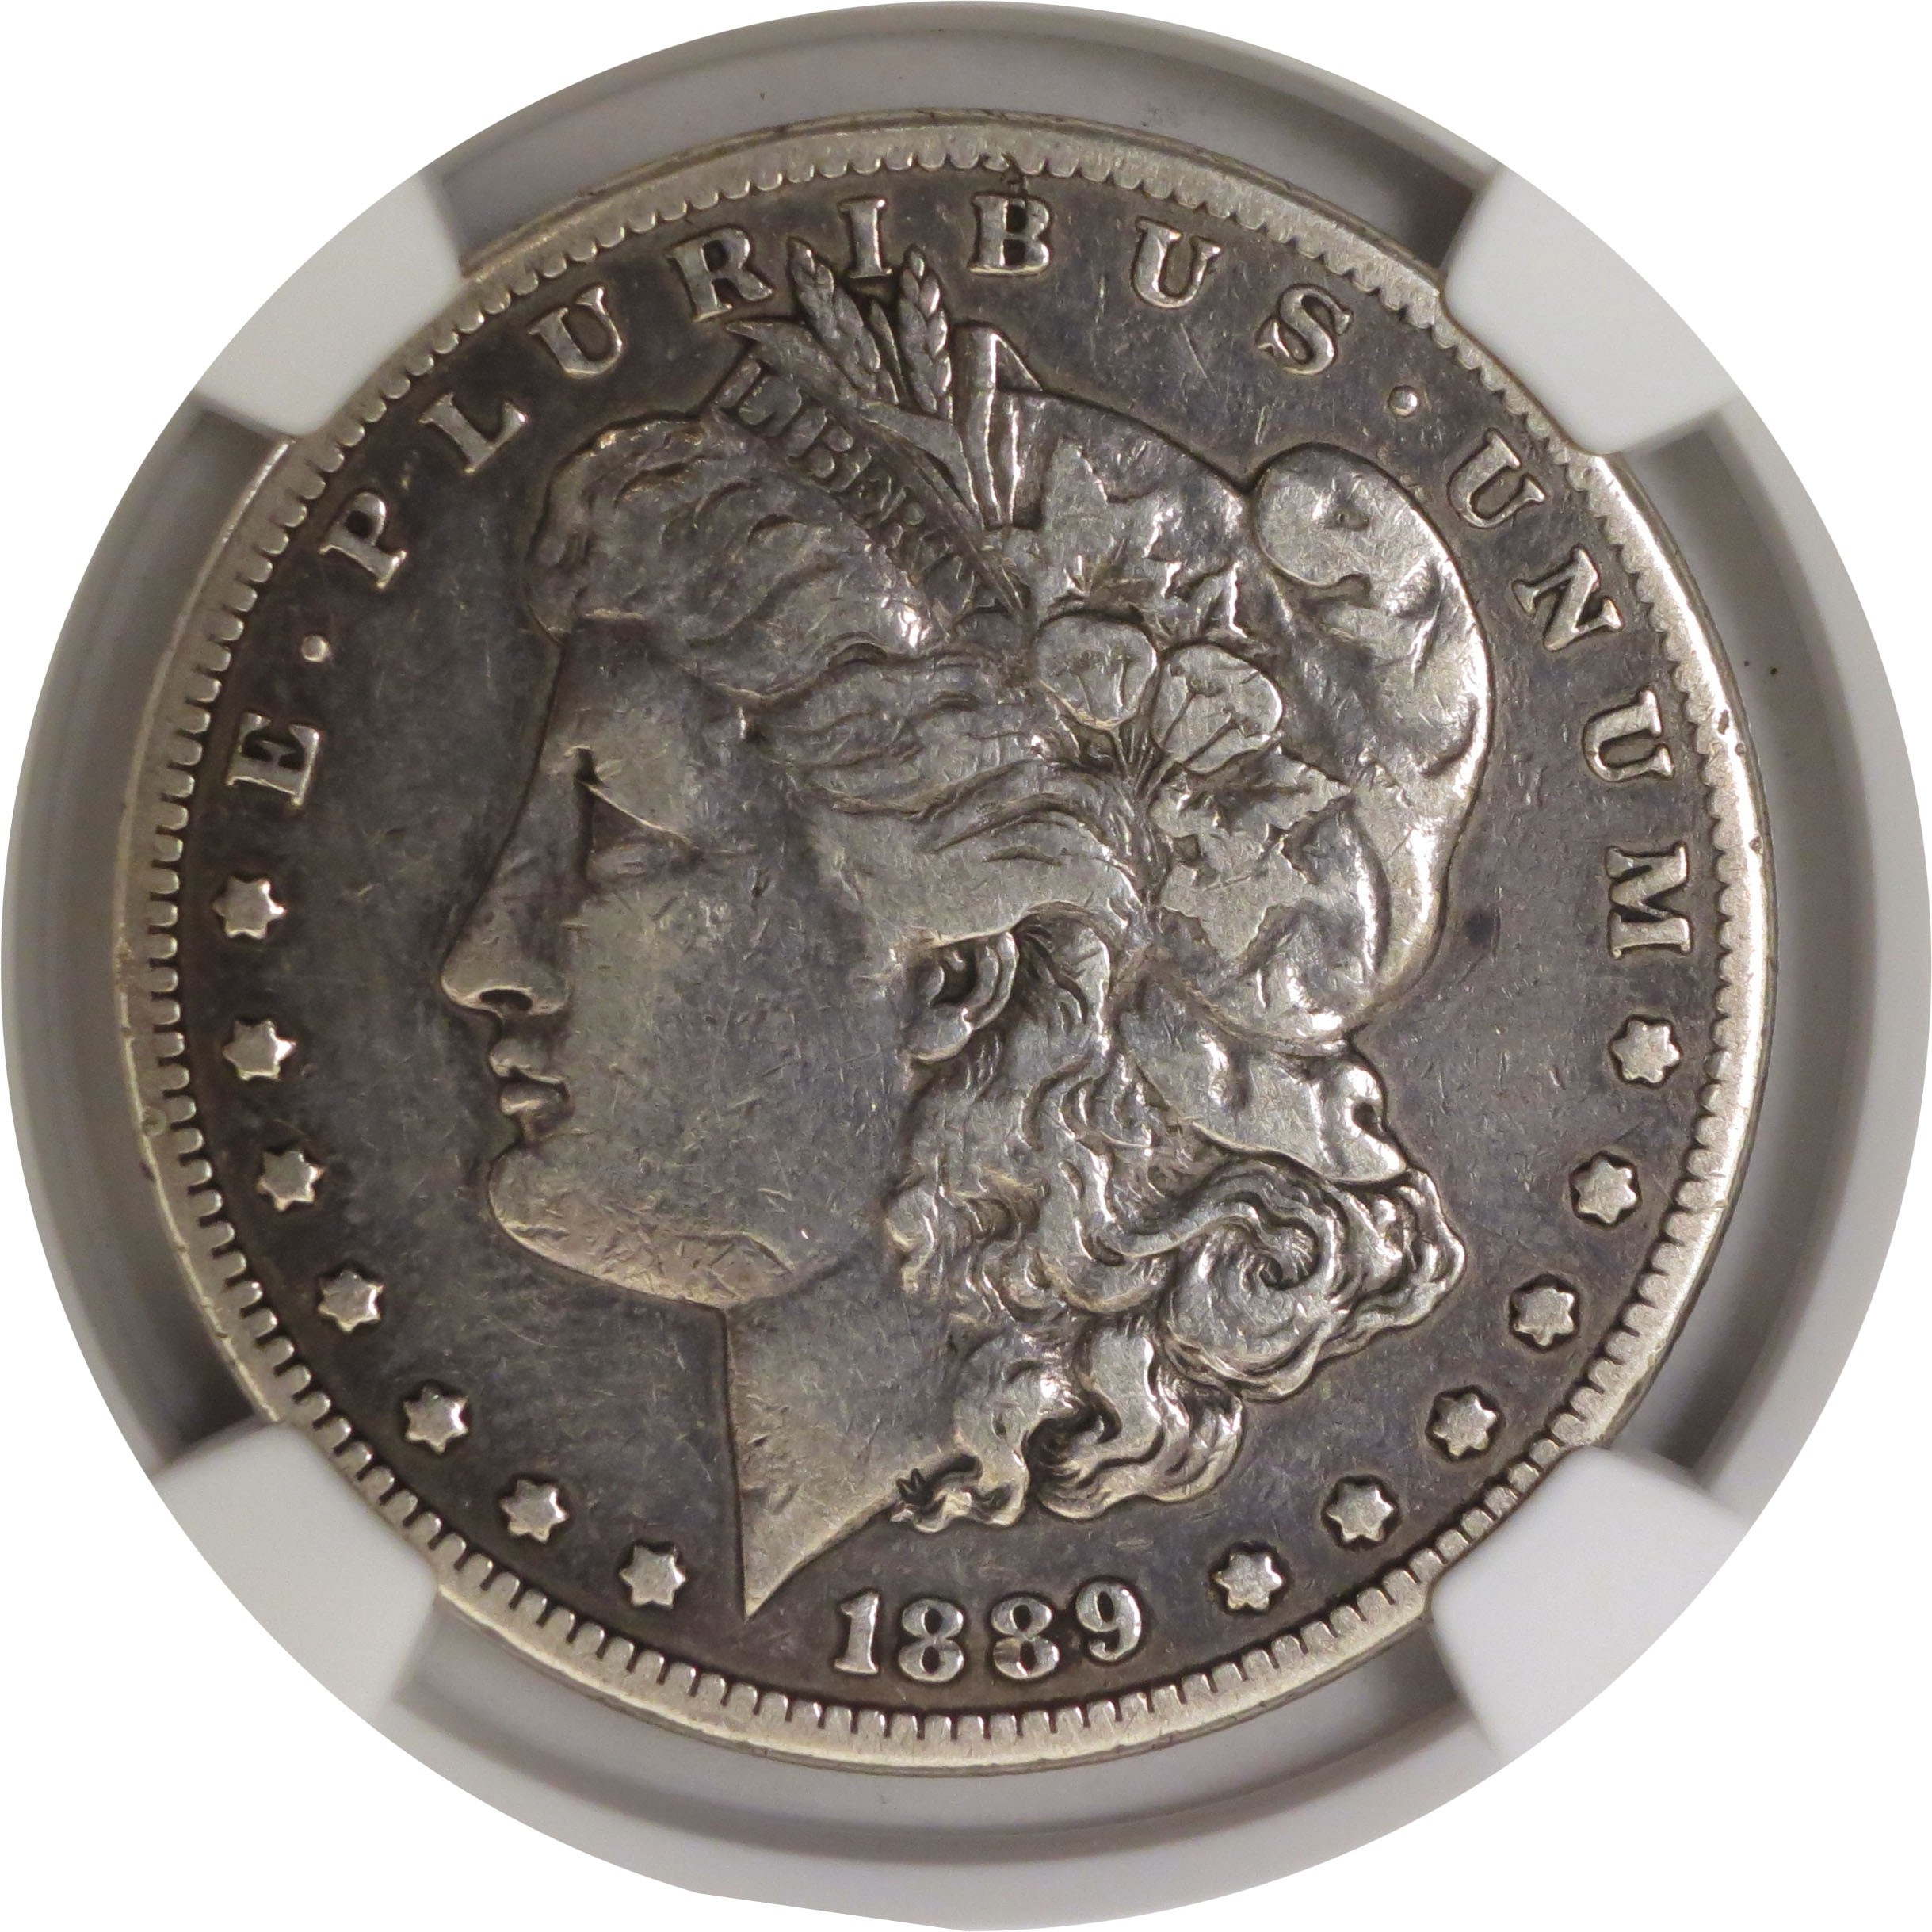 coinage act of 1873